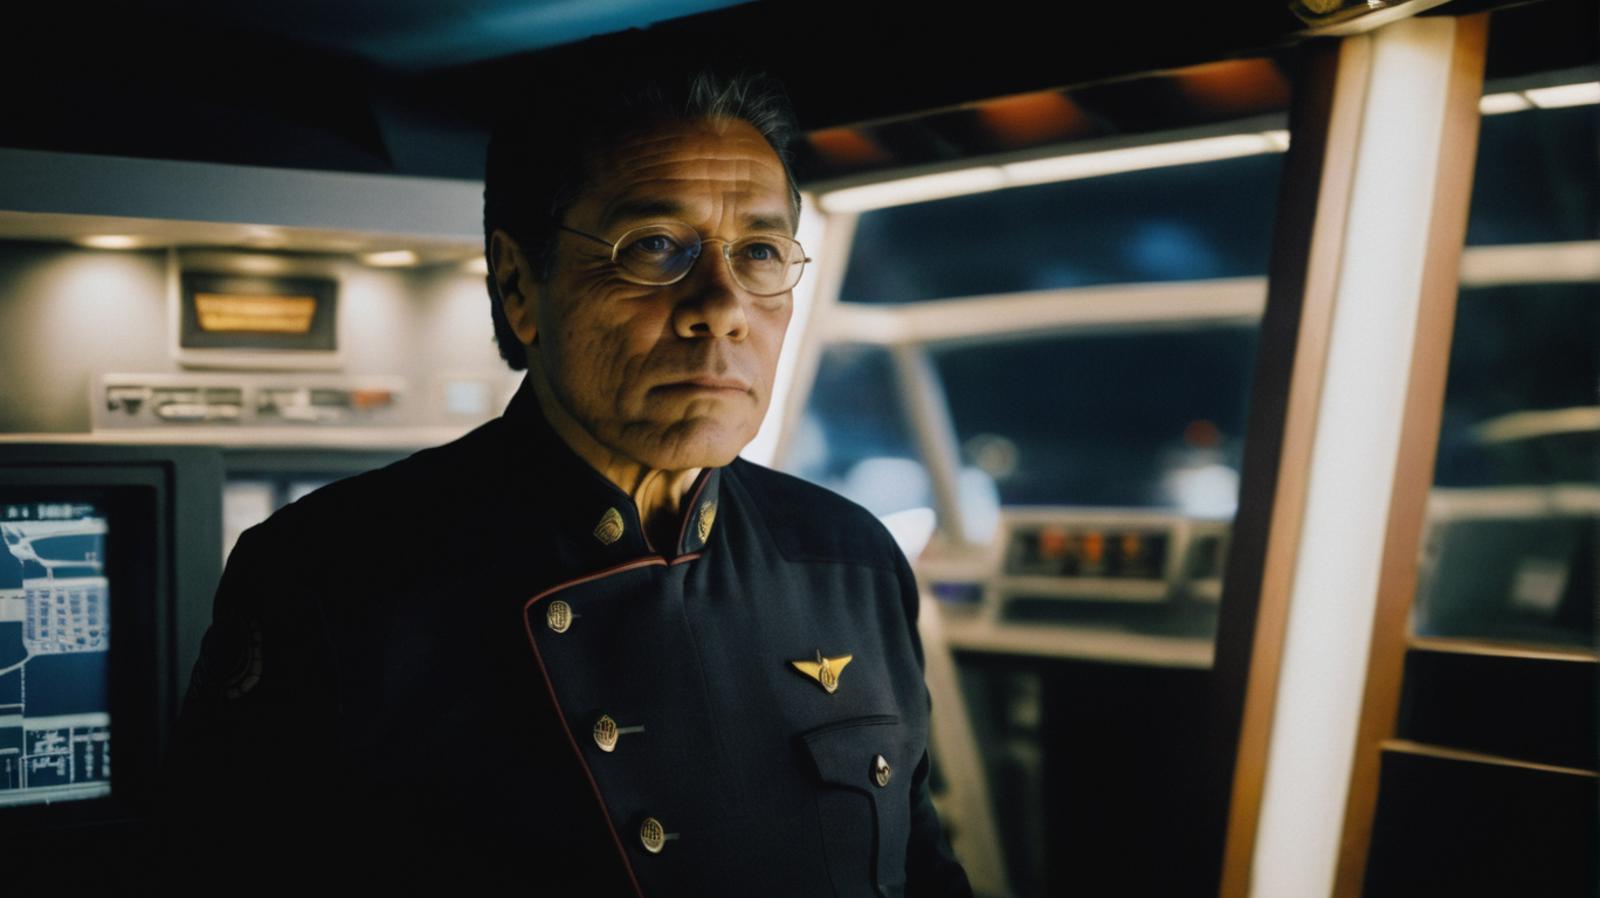 SDXL Edward James Olmos (Galactica reboot) image by ainow